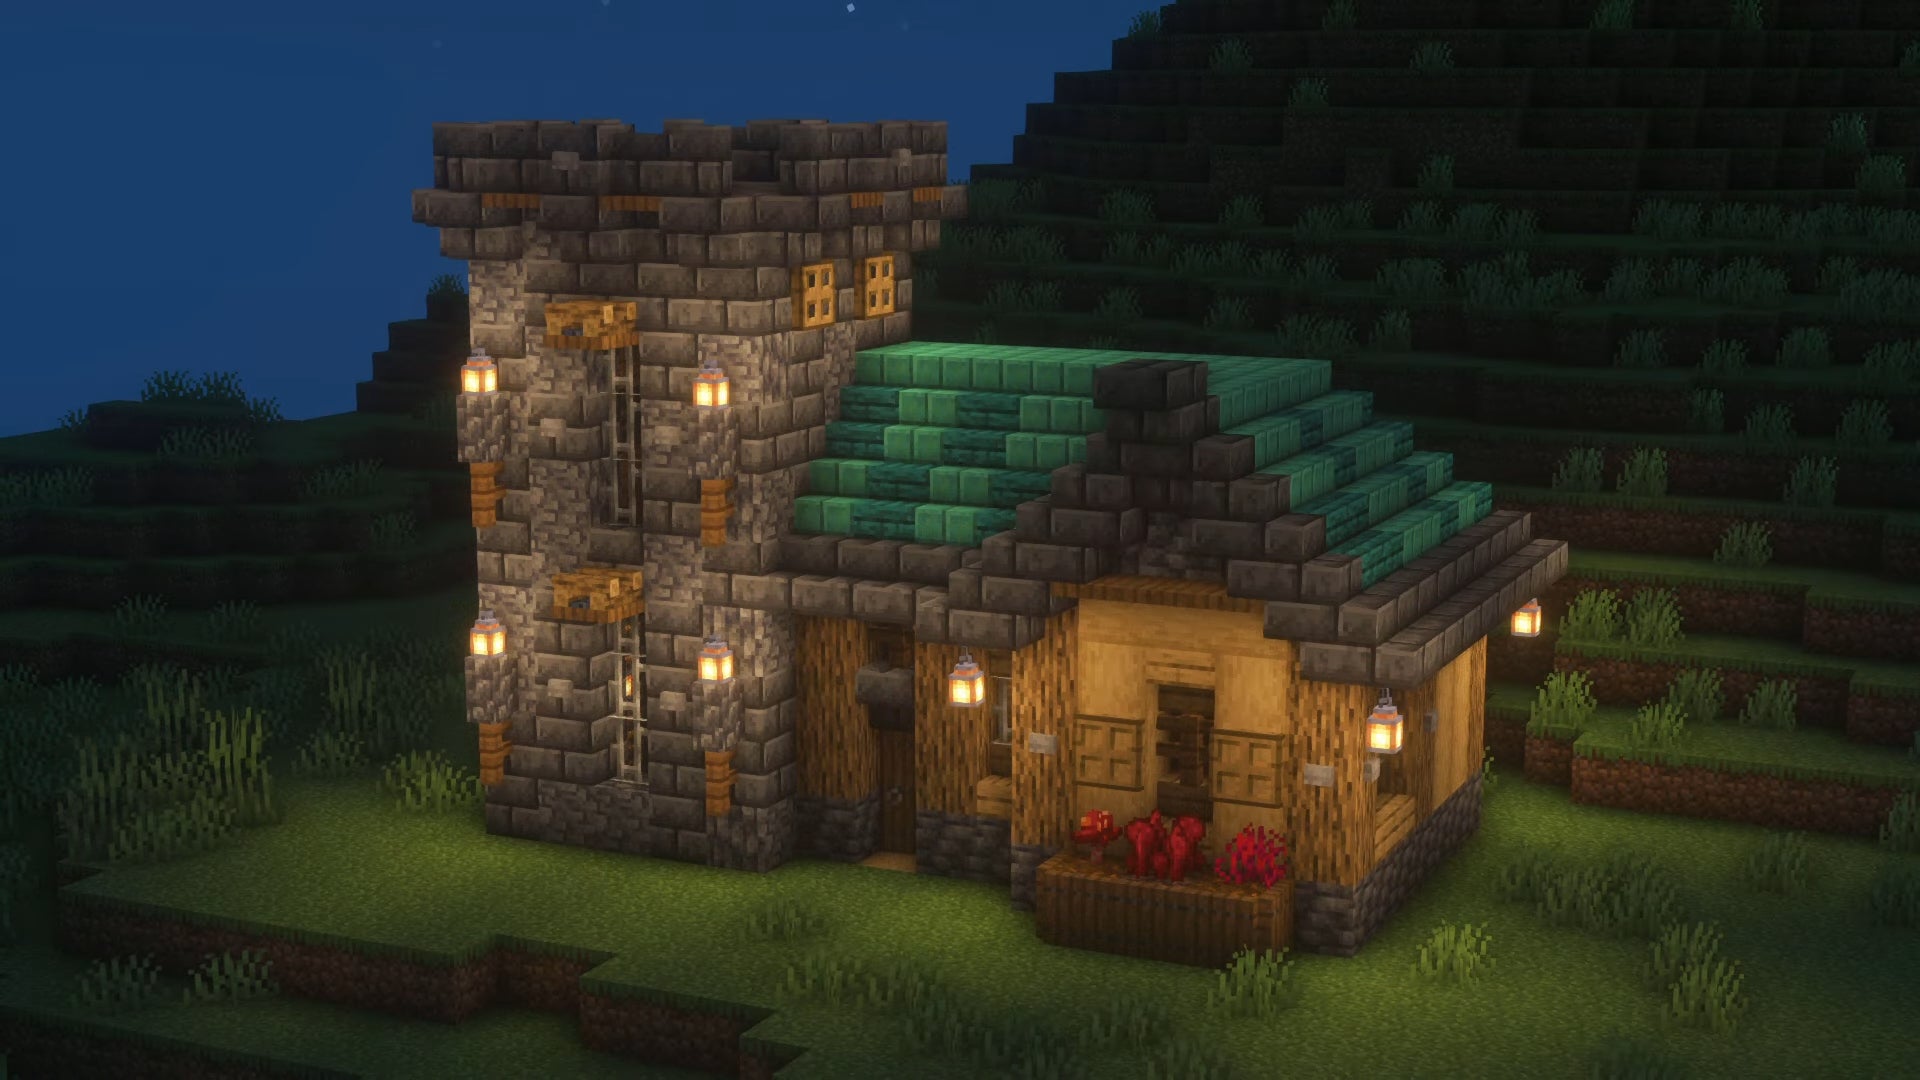 A witch house in Minecraft, built by YouTuber PlatinumThief.